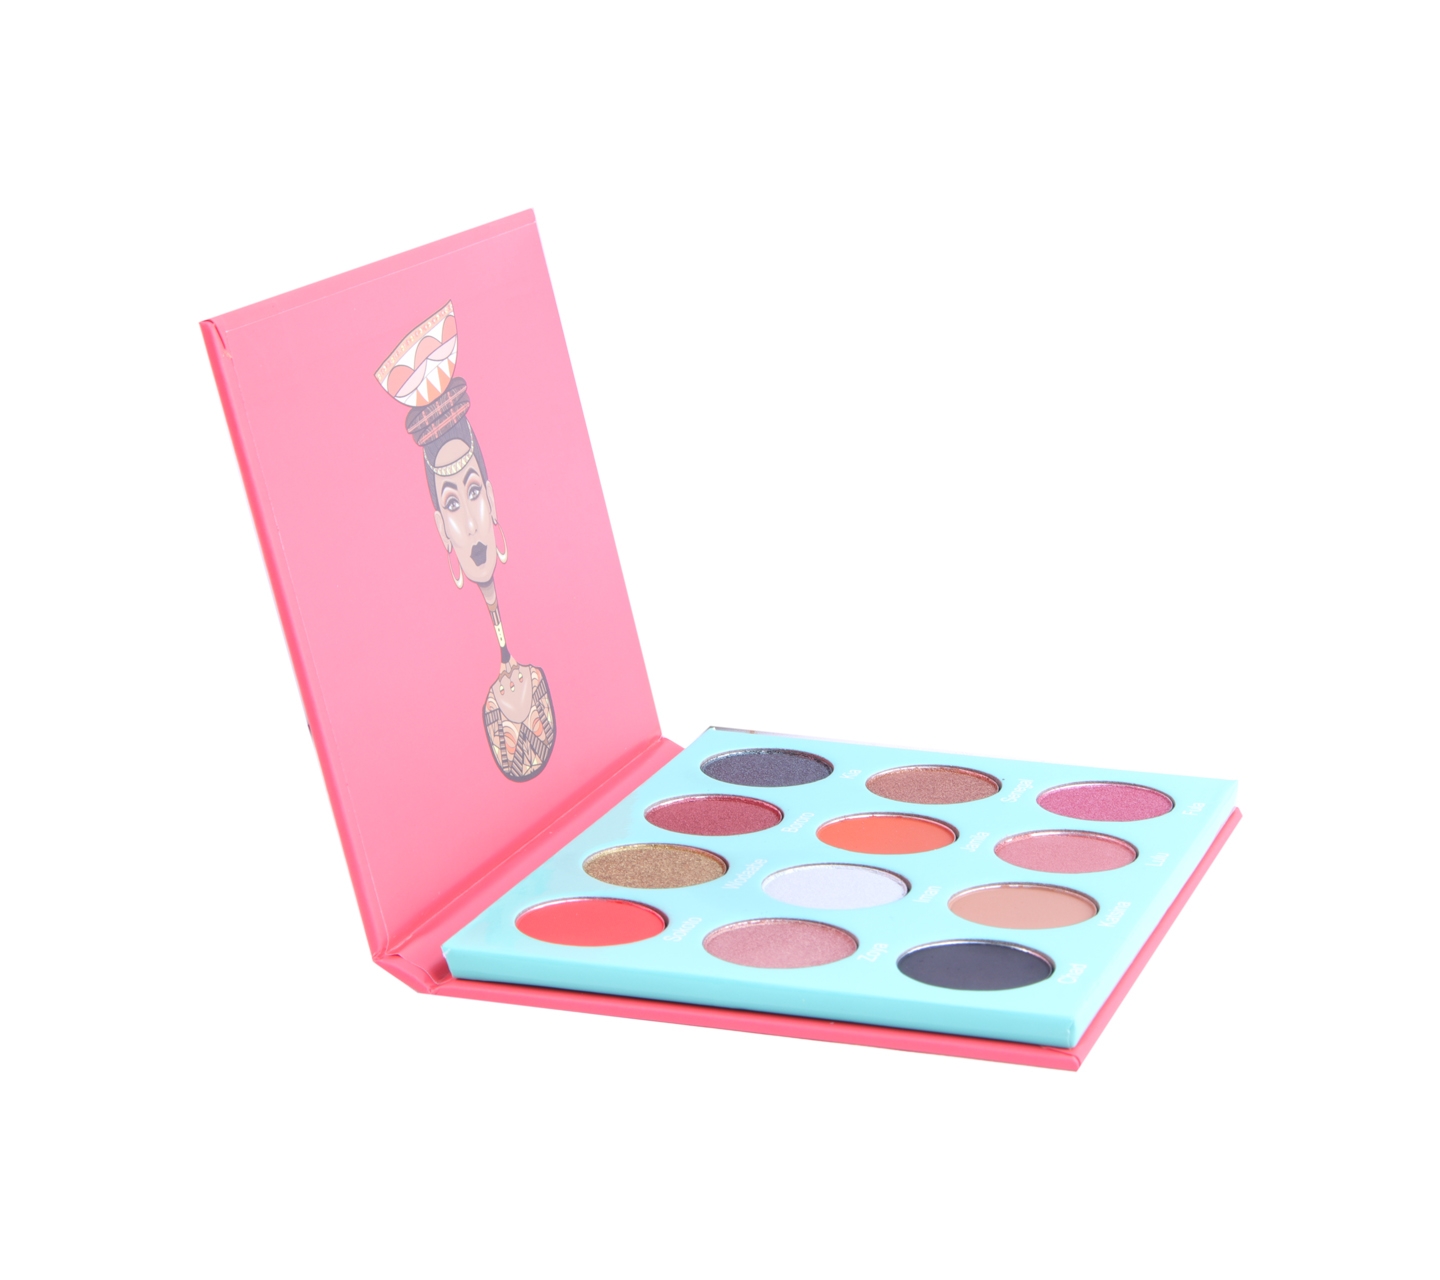 Juvia's The Nubian 2 Eyeshadow Sets and Palette